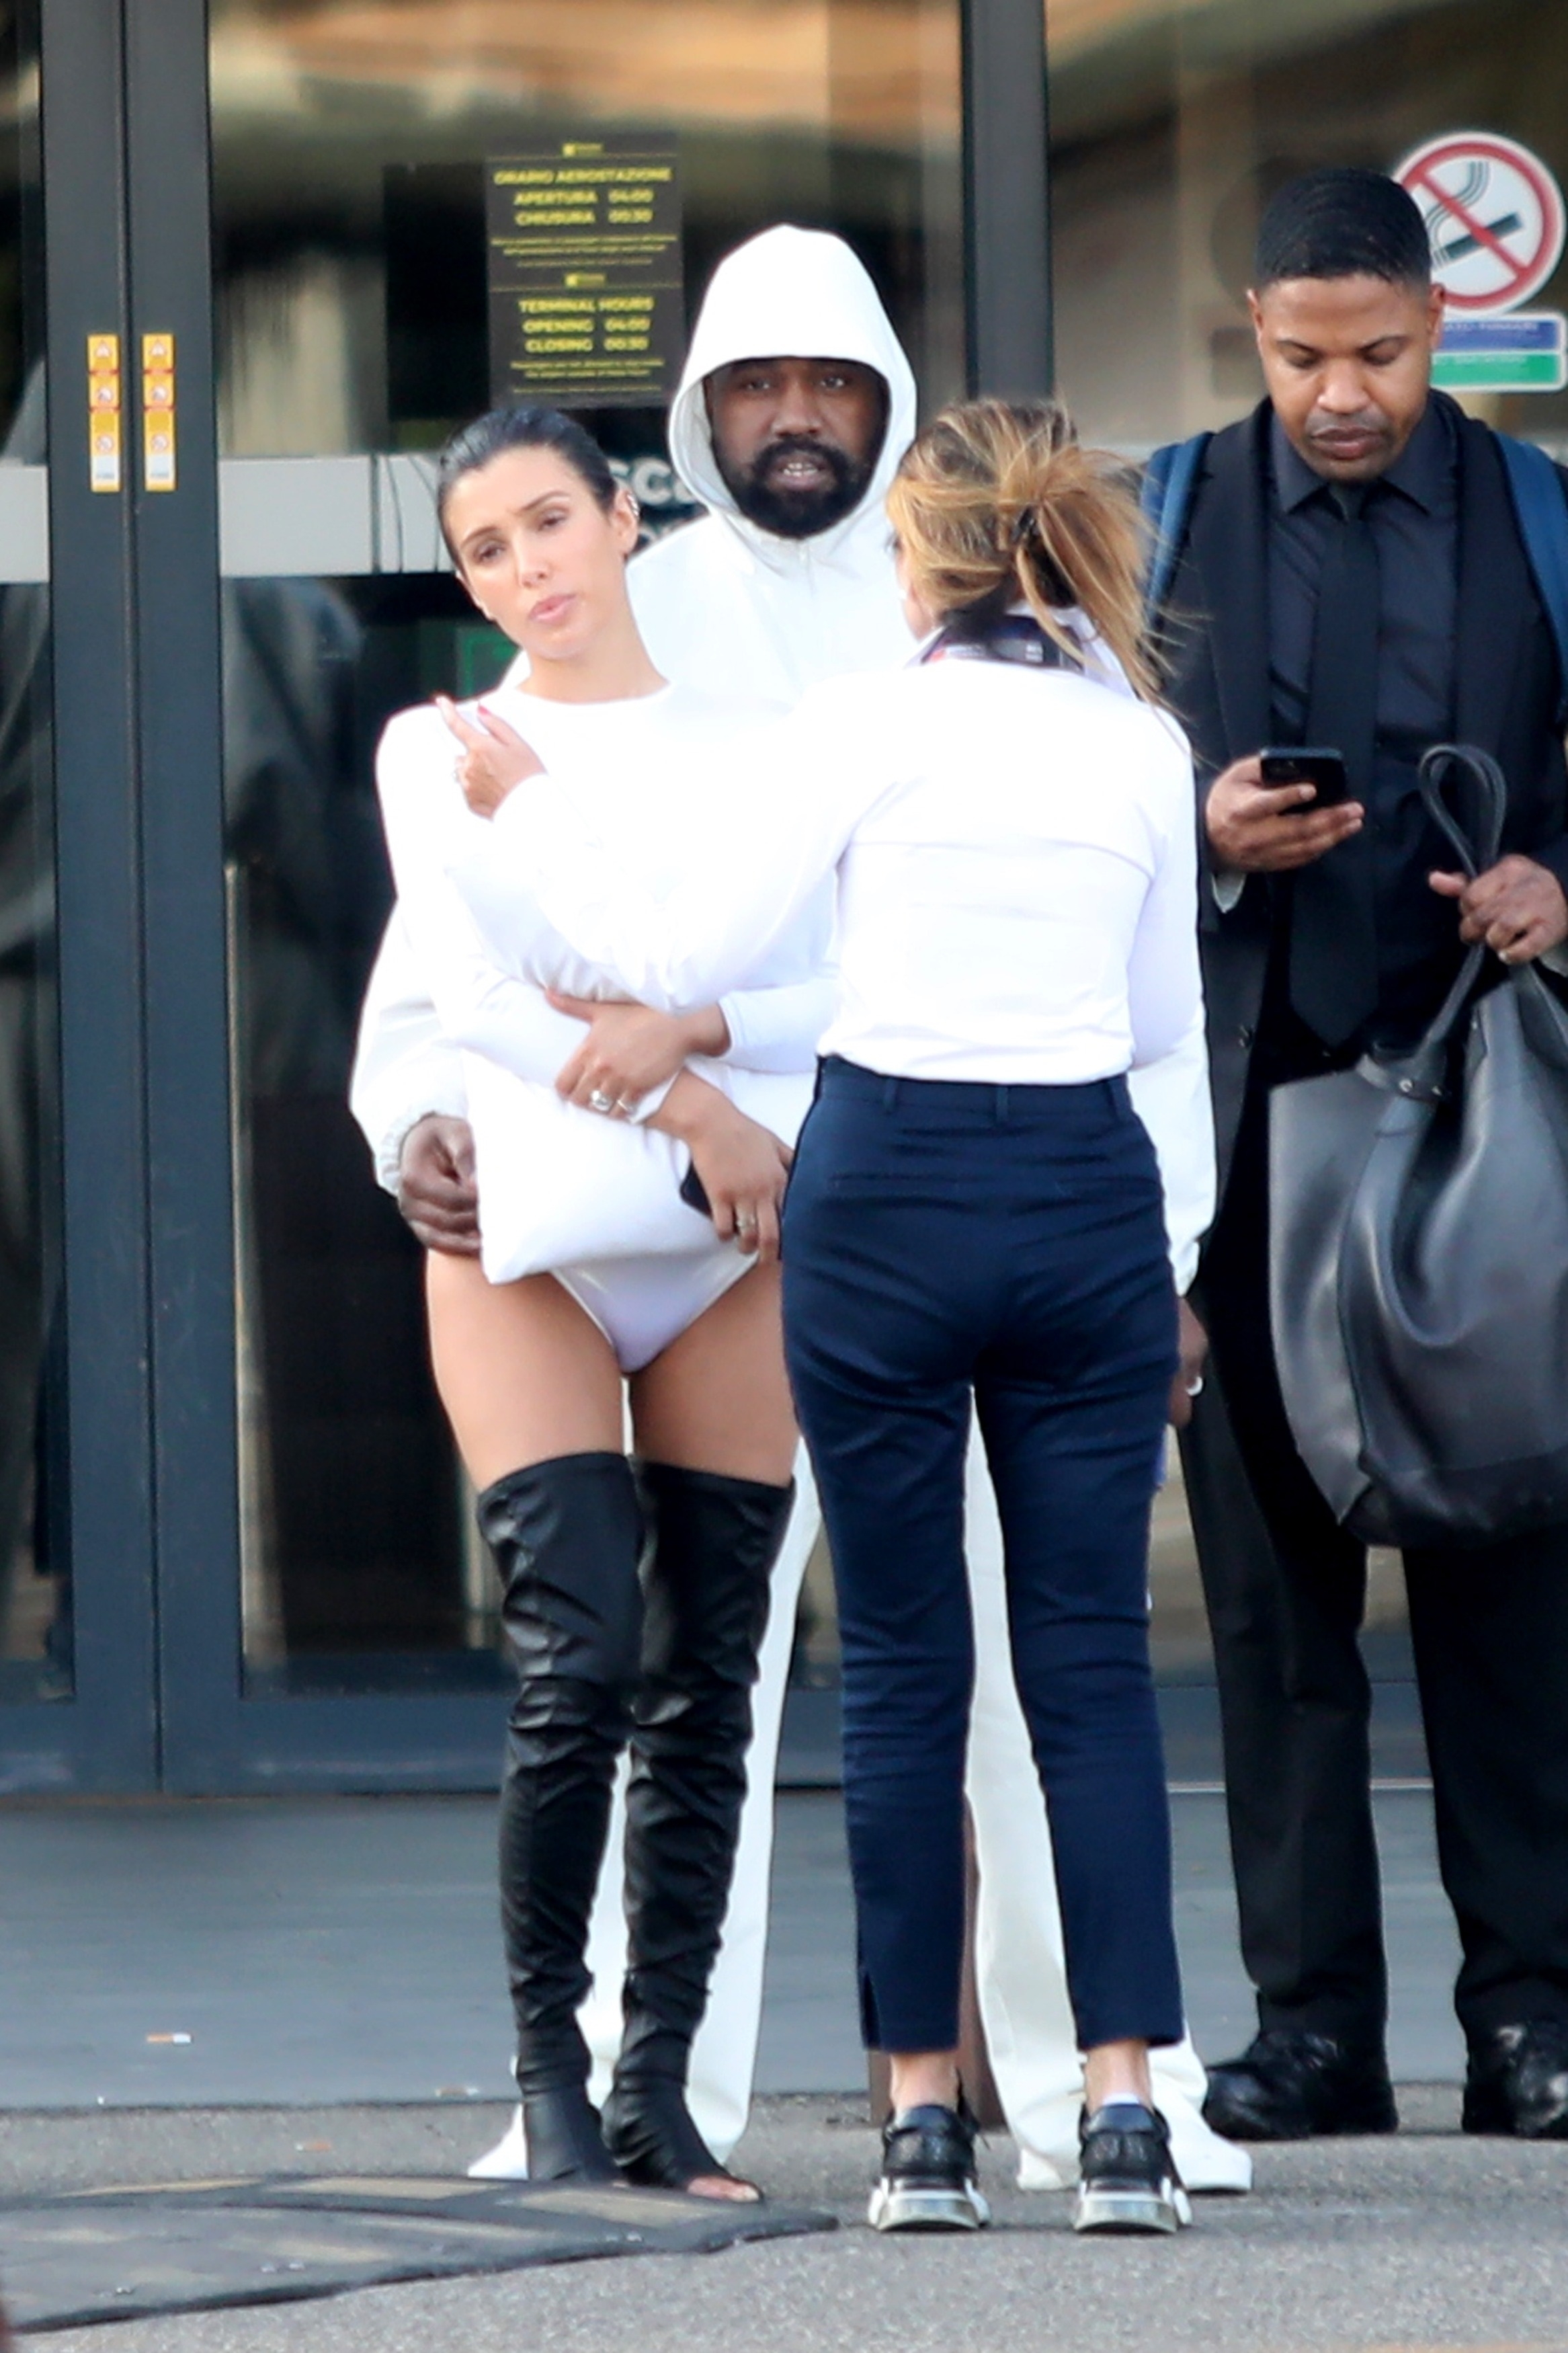 Meanwhile, Kanye chose to cover up in a white hoodie and pants